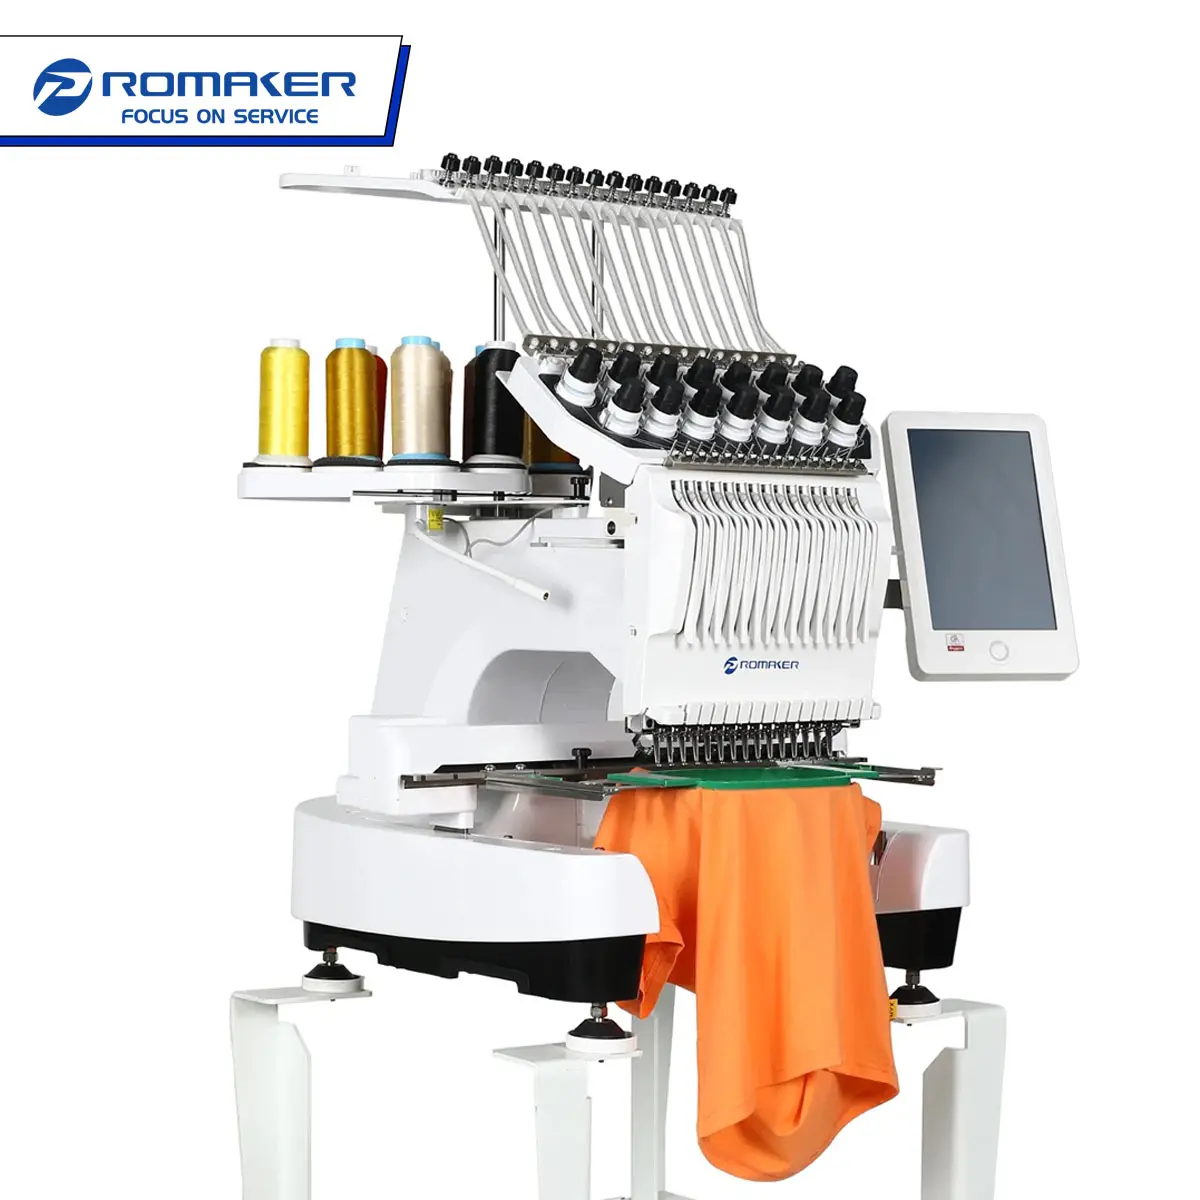 Single Embroidery Machine Suppliers China Promaker Single Head Computer Embroidery Sewing Machine Customized With High Quality